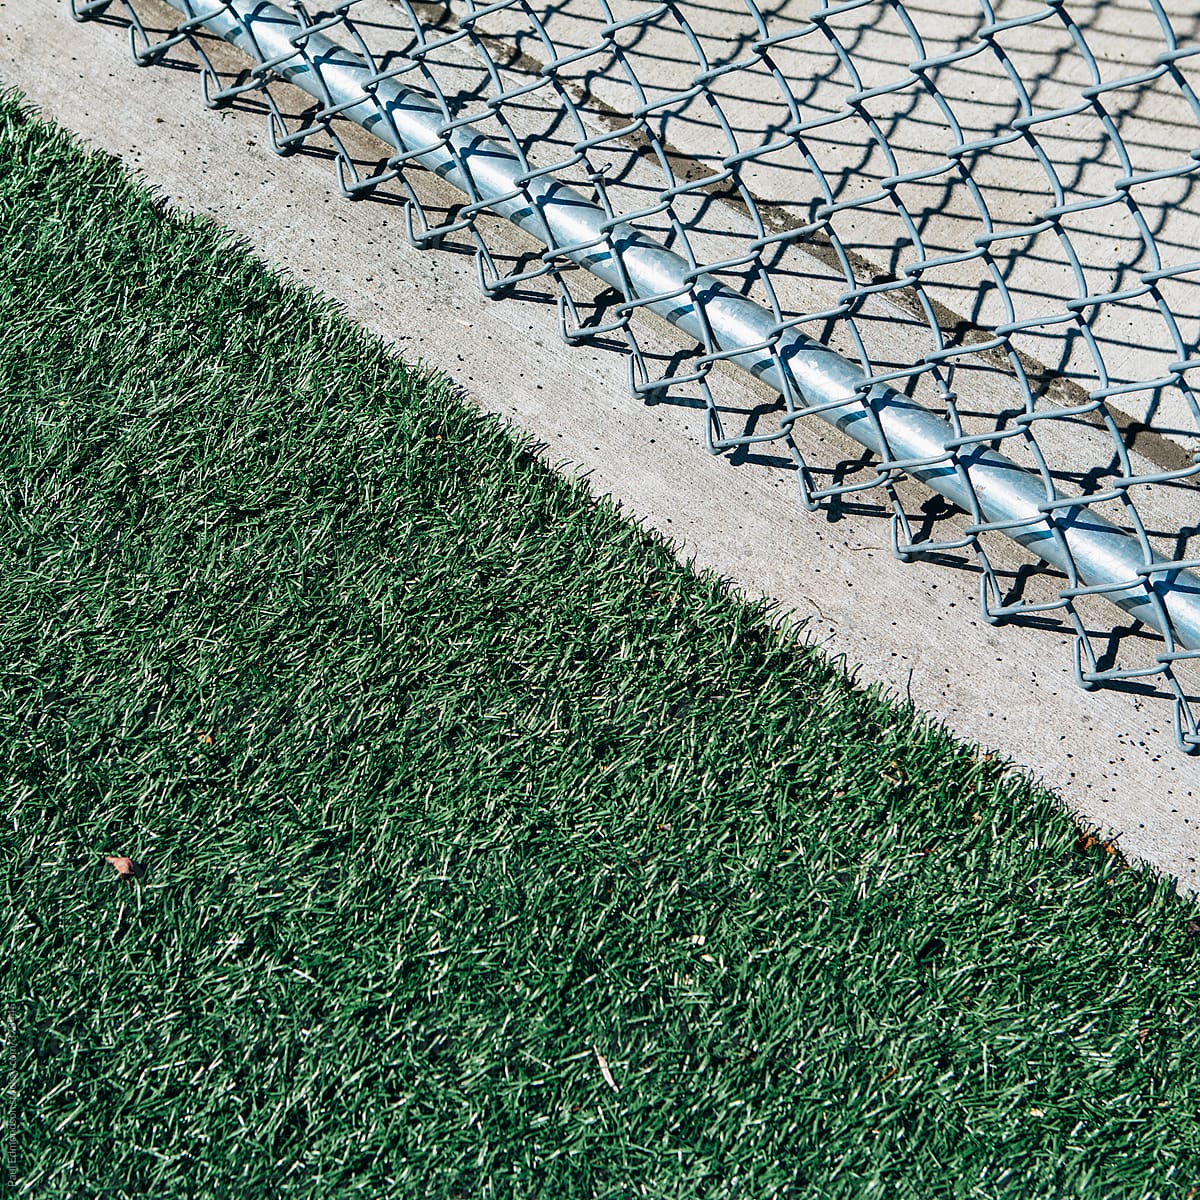 Chain link fence on edge of artificial turf sports field, close up